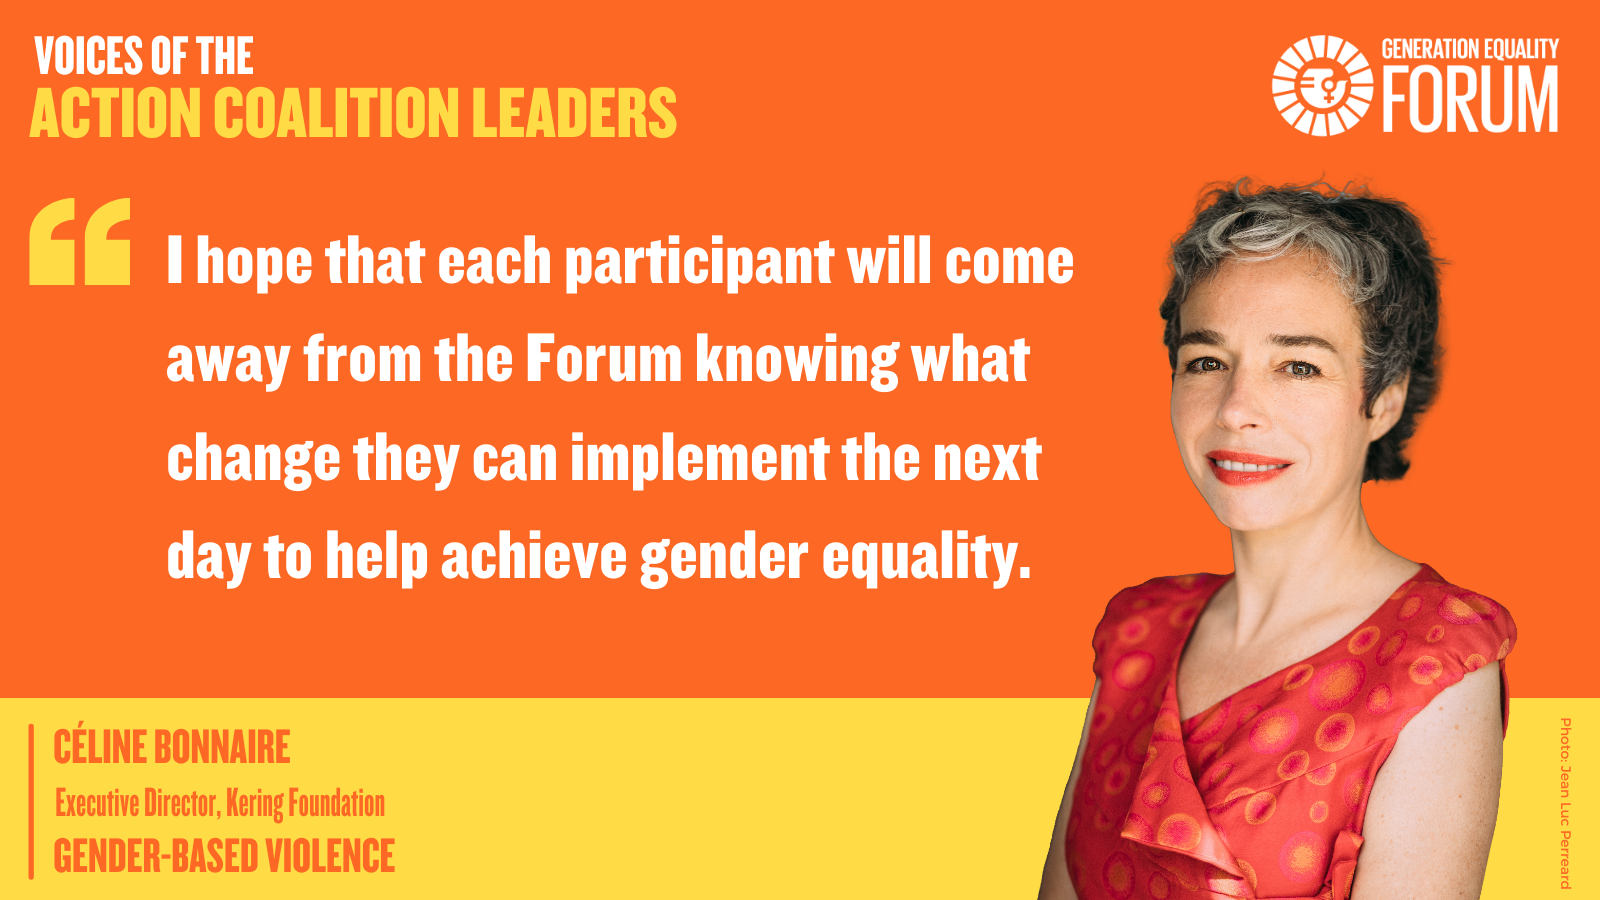 "I hope that each participant will come away from the forum knowing what change they can implement the next day to help achieve gender equality." - Celine Bonnaire, 